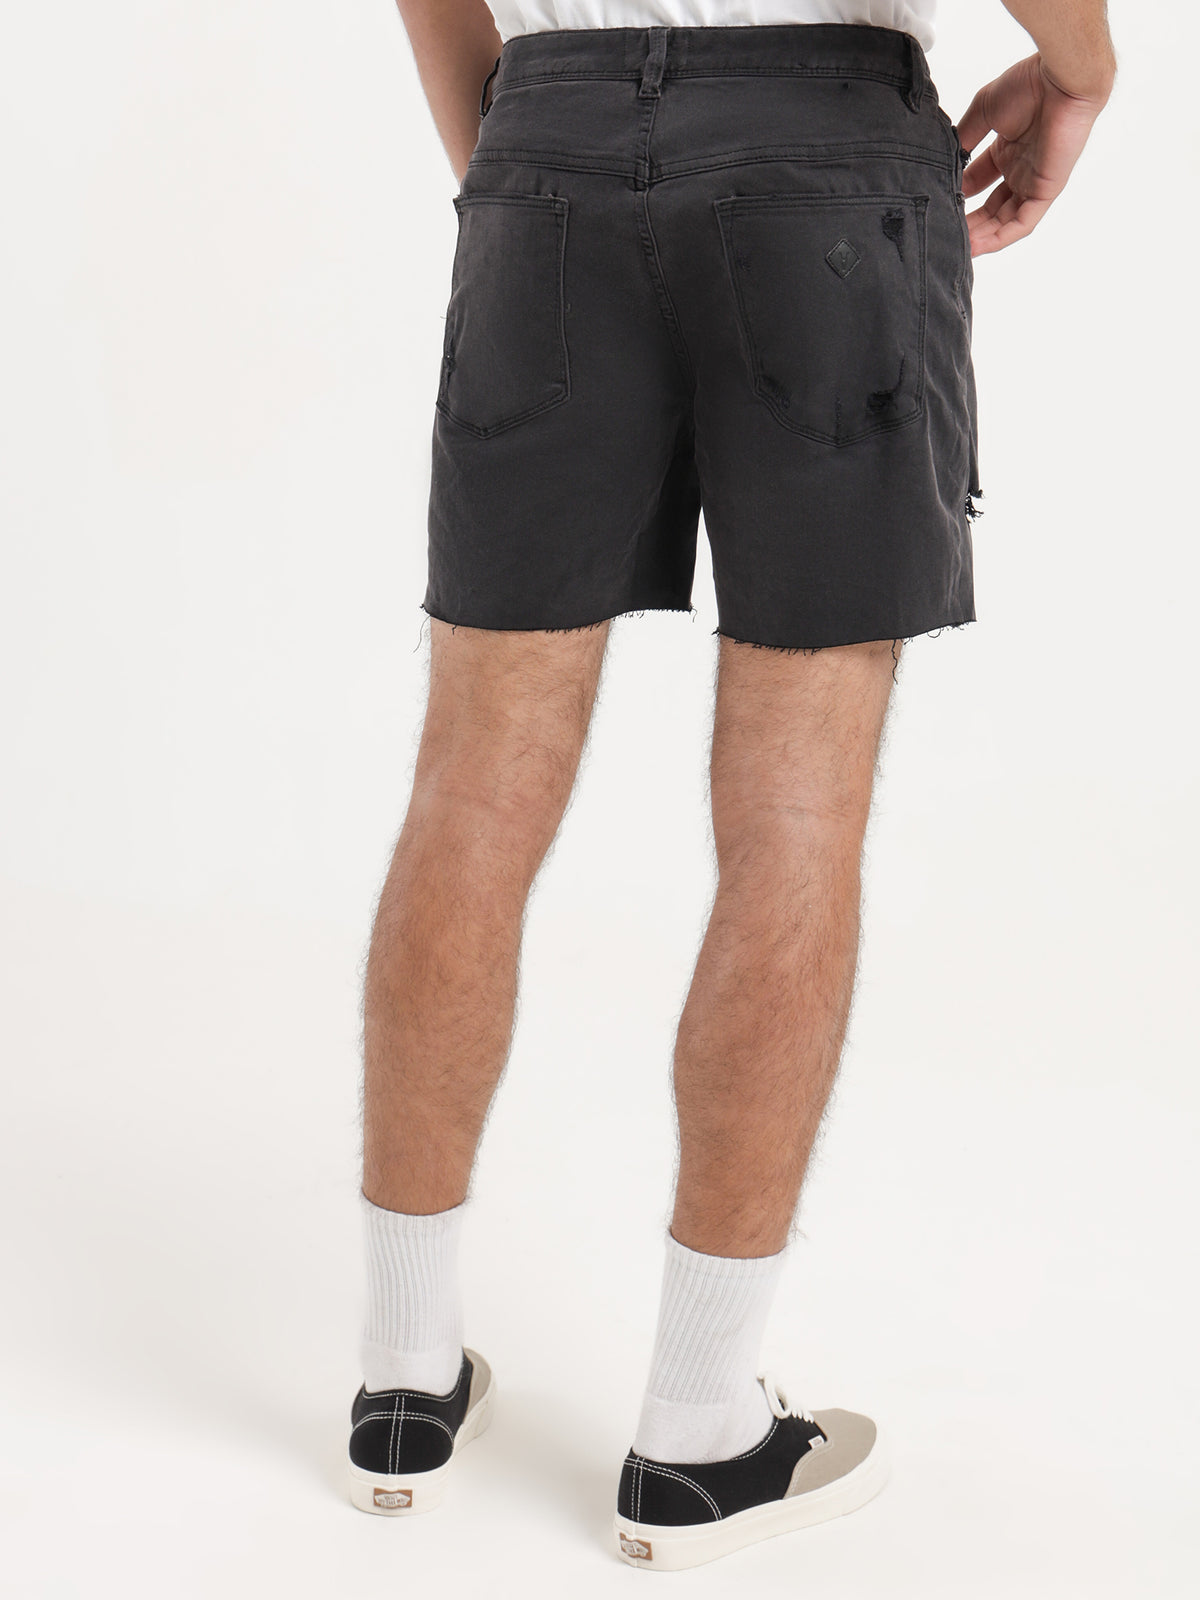 A Cropped Slim Shorts in Smoke